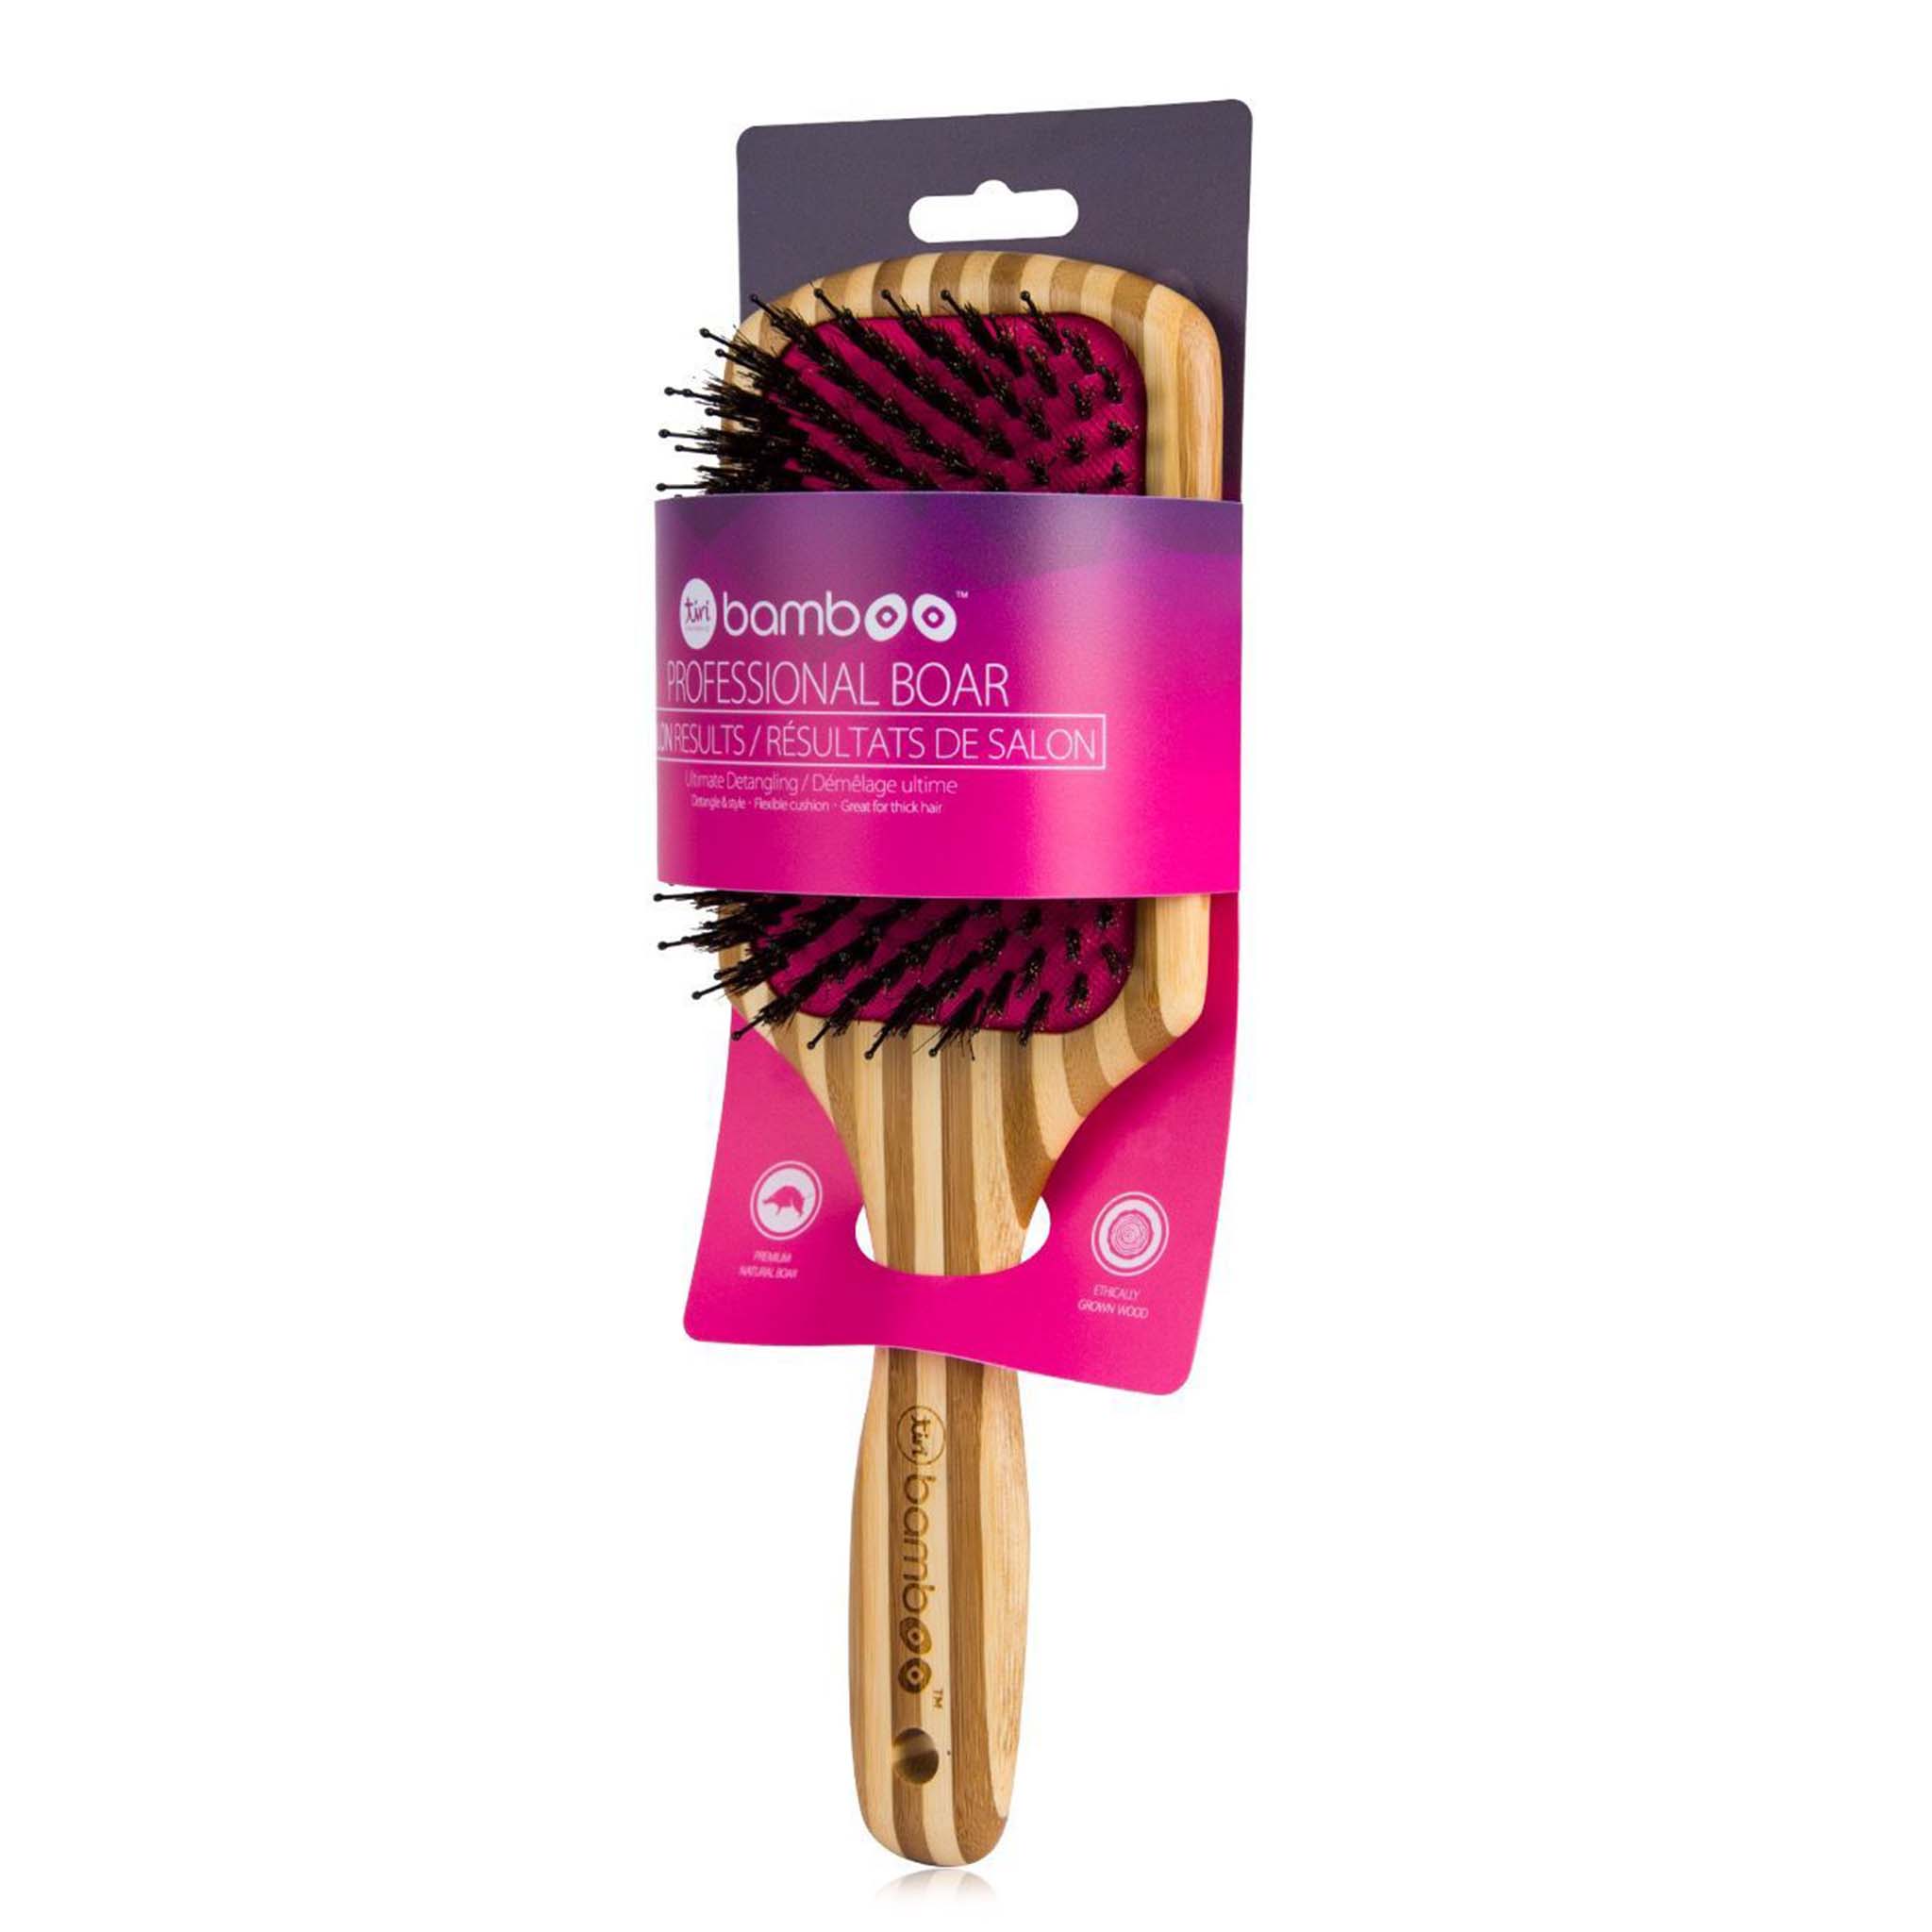 Bamboo XL Detangling Paddle Brush with Boar Bristles